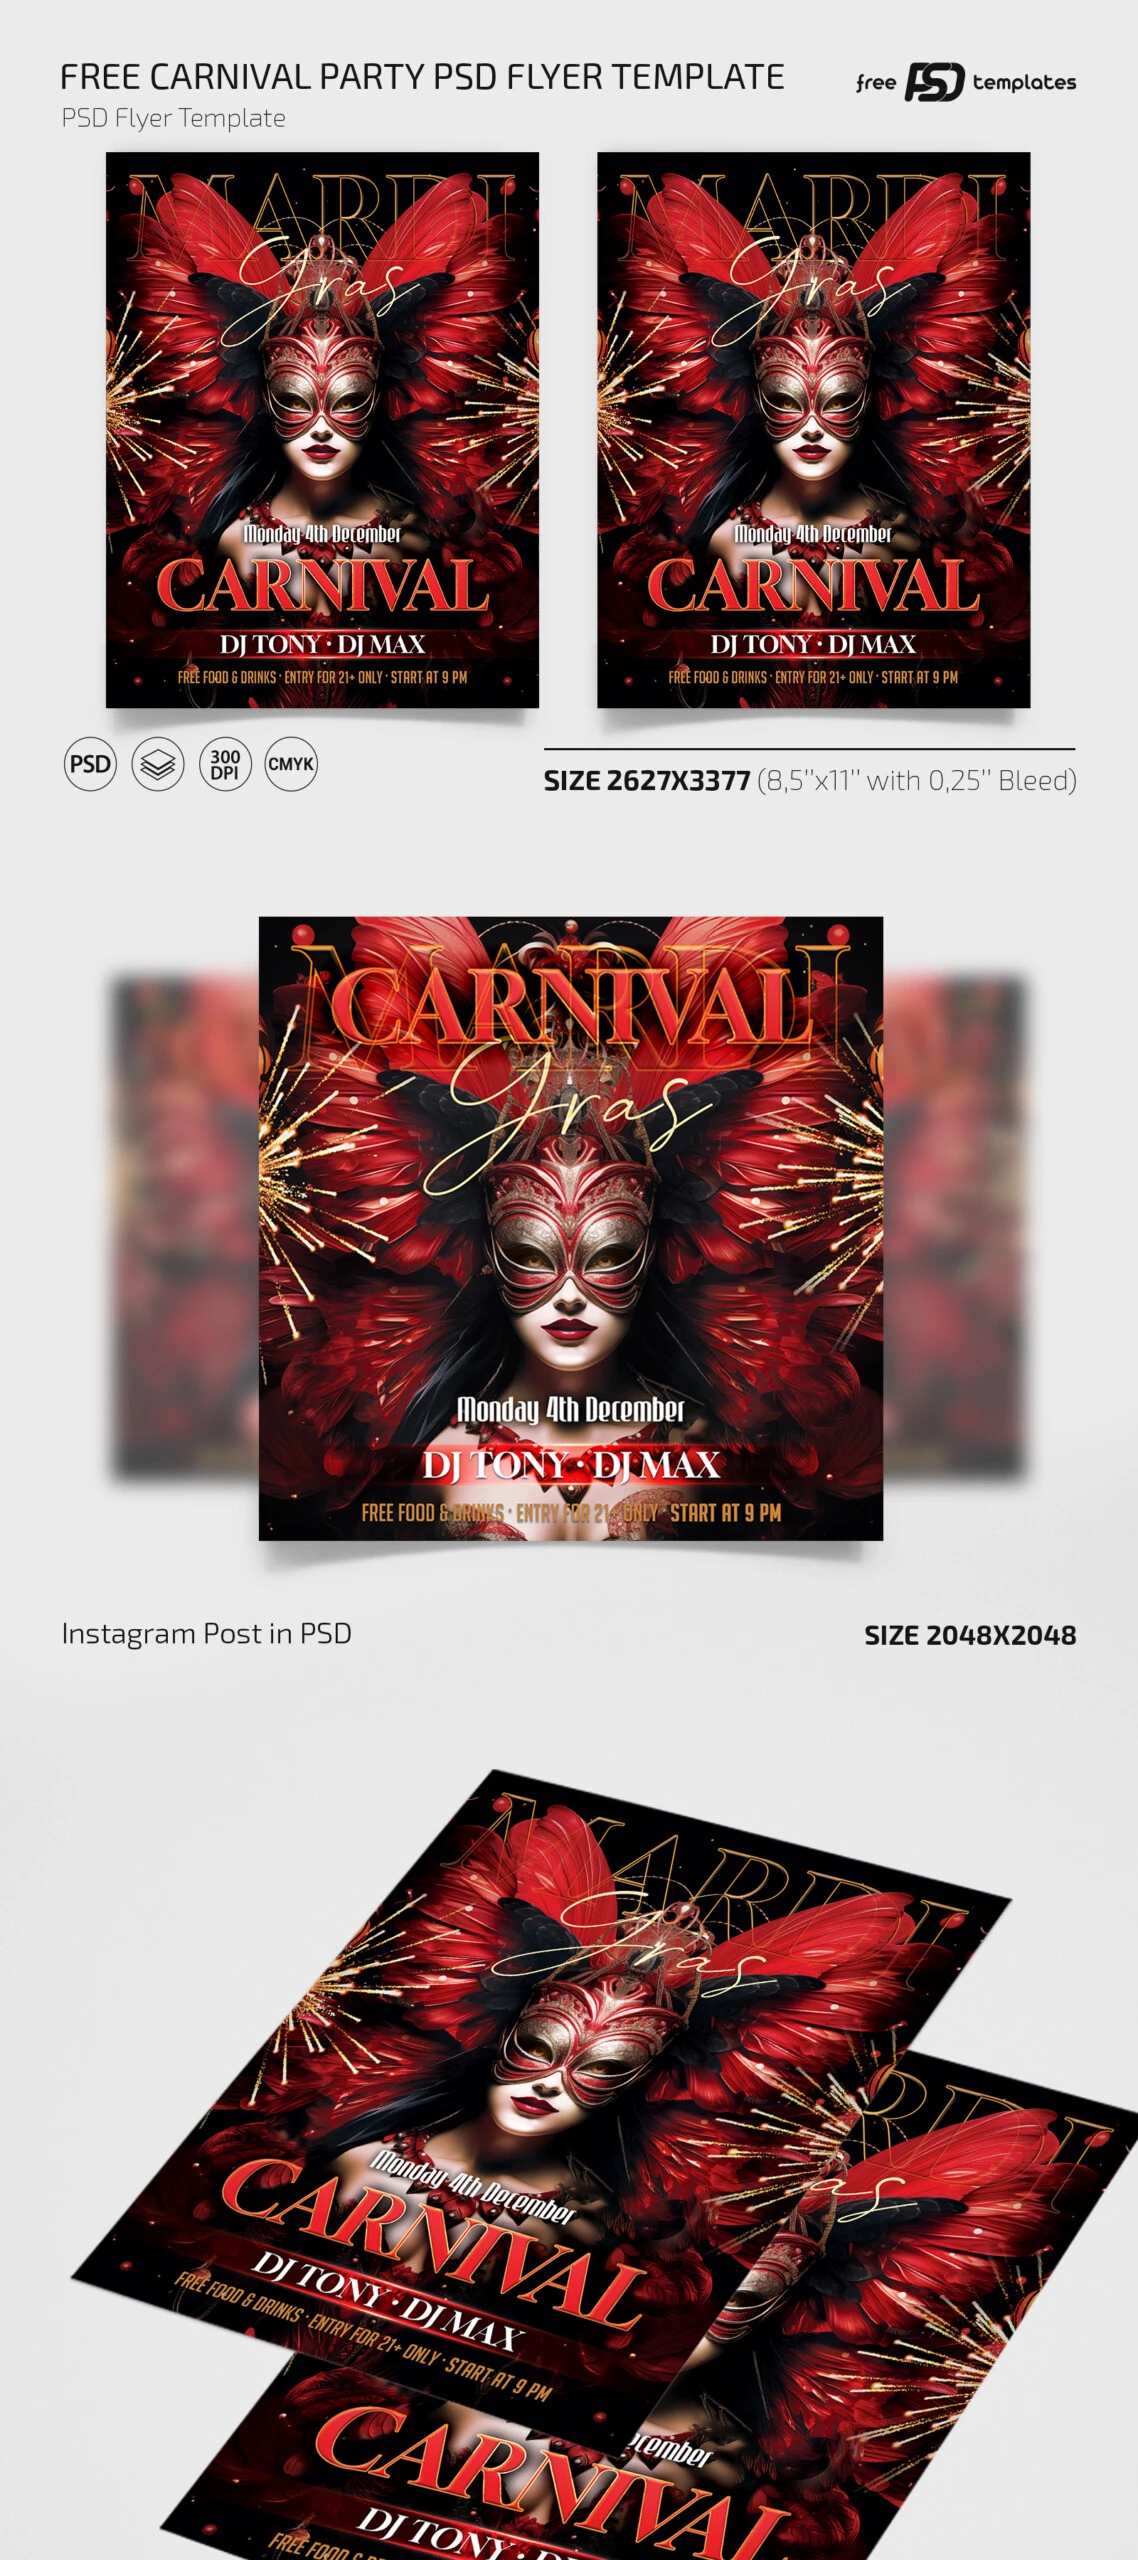 Free Carnival Party PSD Flyer Template